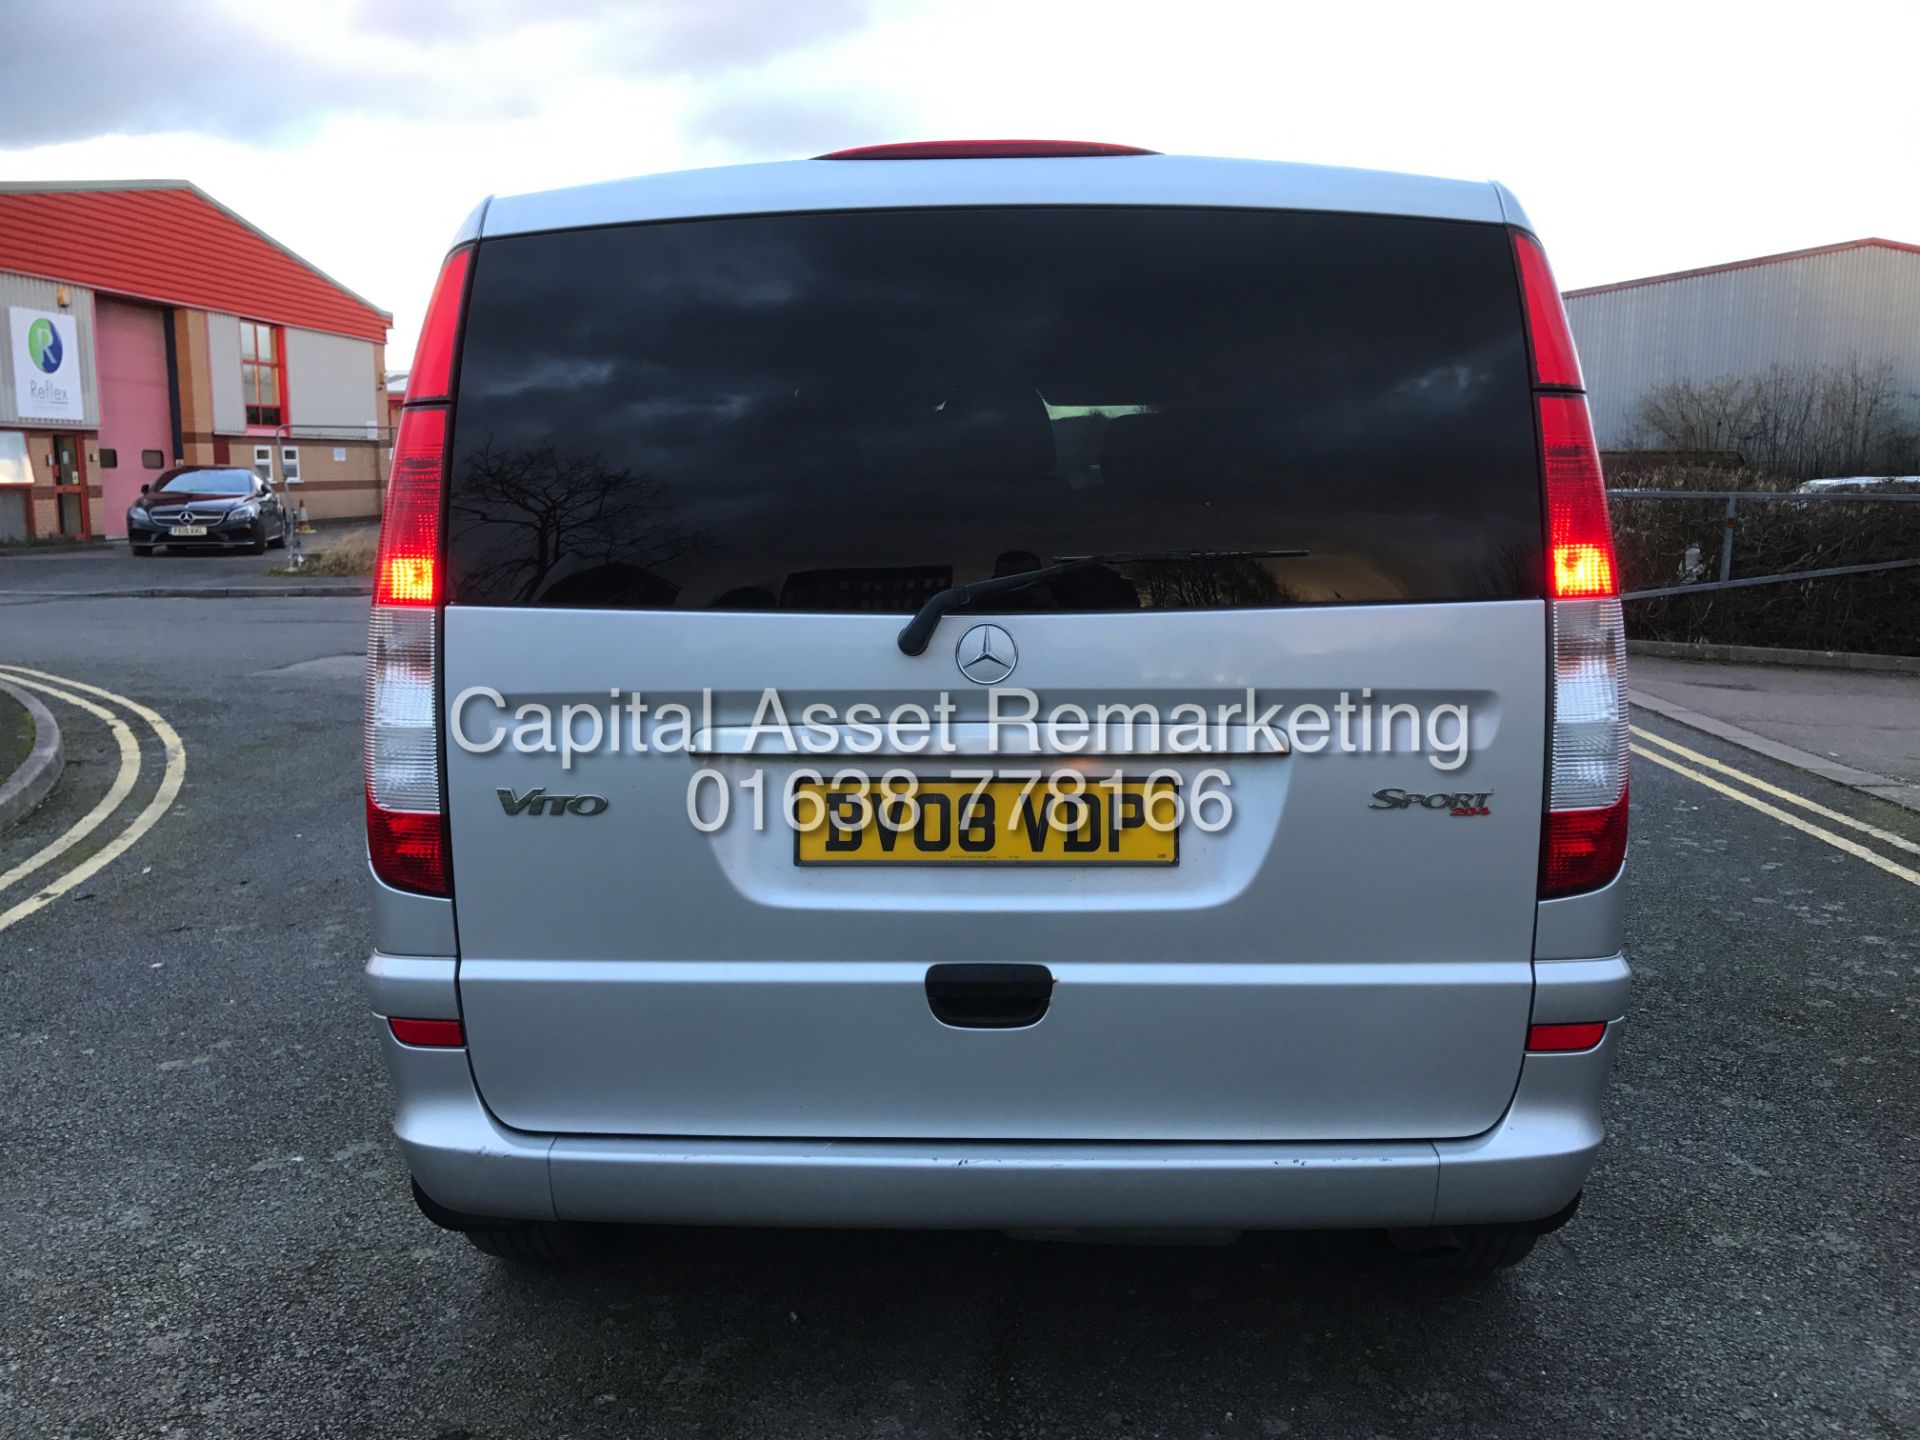 (ON SALE) MERCEDES VITO 3.0V6 "120CDI SPORT" AUTO (08 REG) 6 SEATER - 1 OWNER - AIR CON - CRUISE - Image 7 of 20